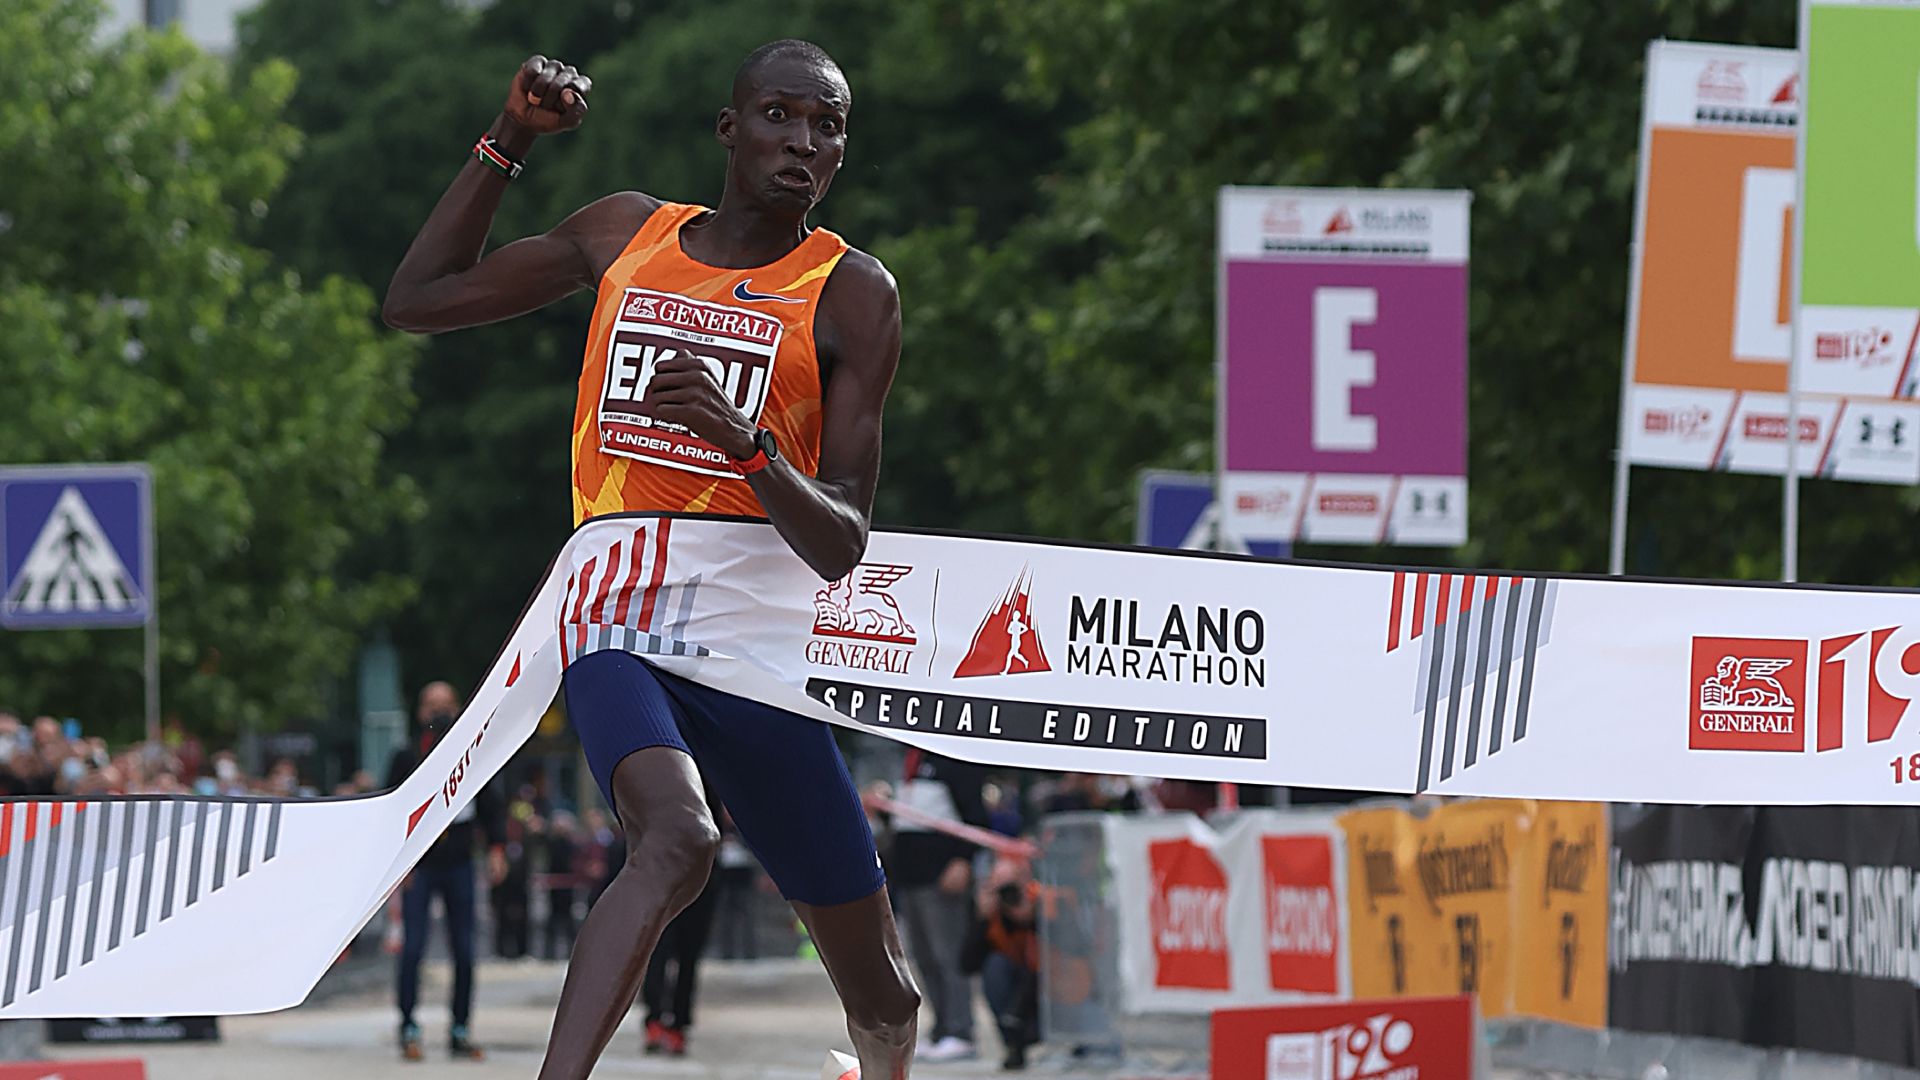 Four More World-class Elite Athletes Confirmed To Participate In The 2021 ADNOC Abu Dhabi Marathon